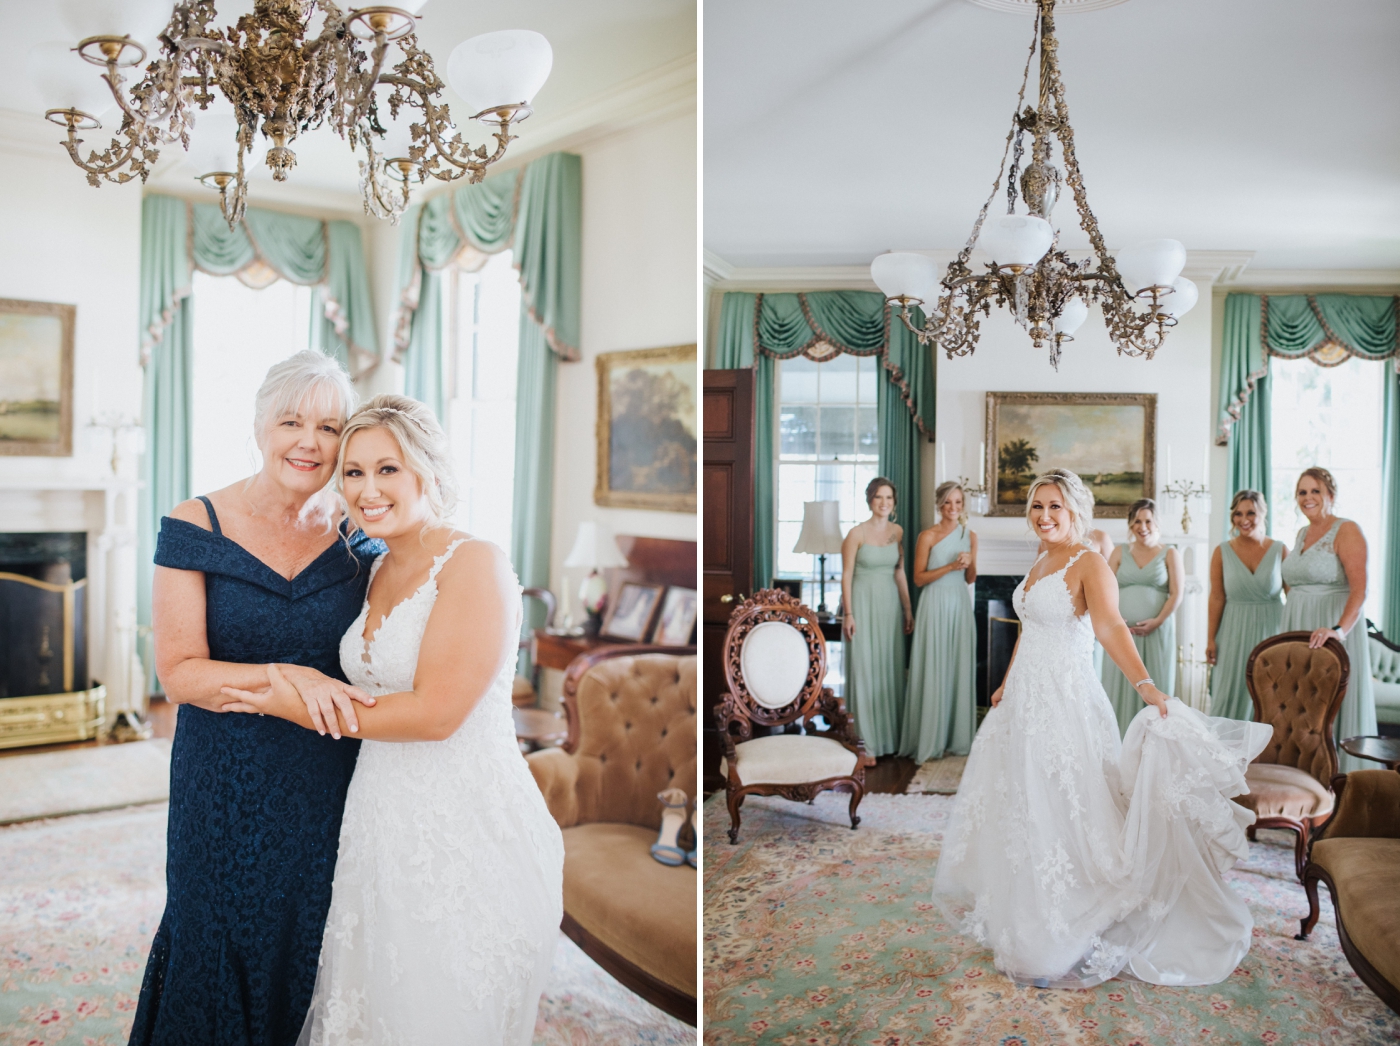 Bride in the Courtney gown from Rebecca Ingram from Ivory & Beau Bridal Boutique